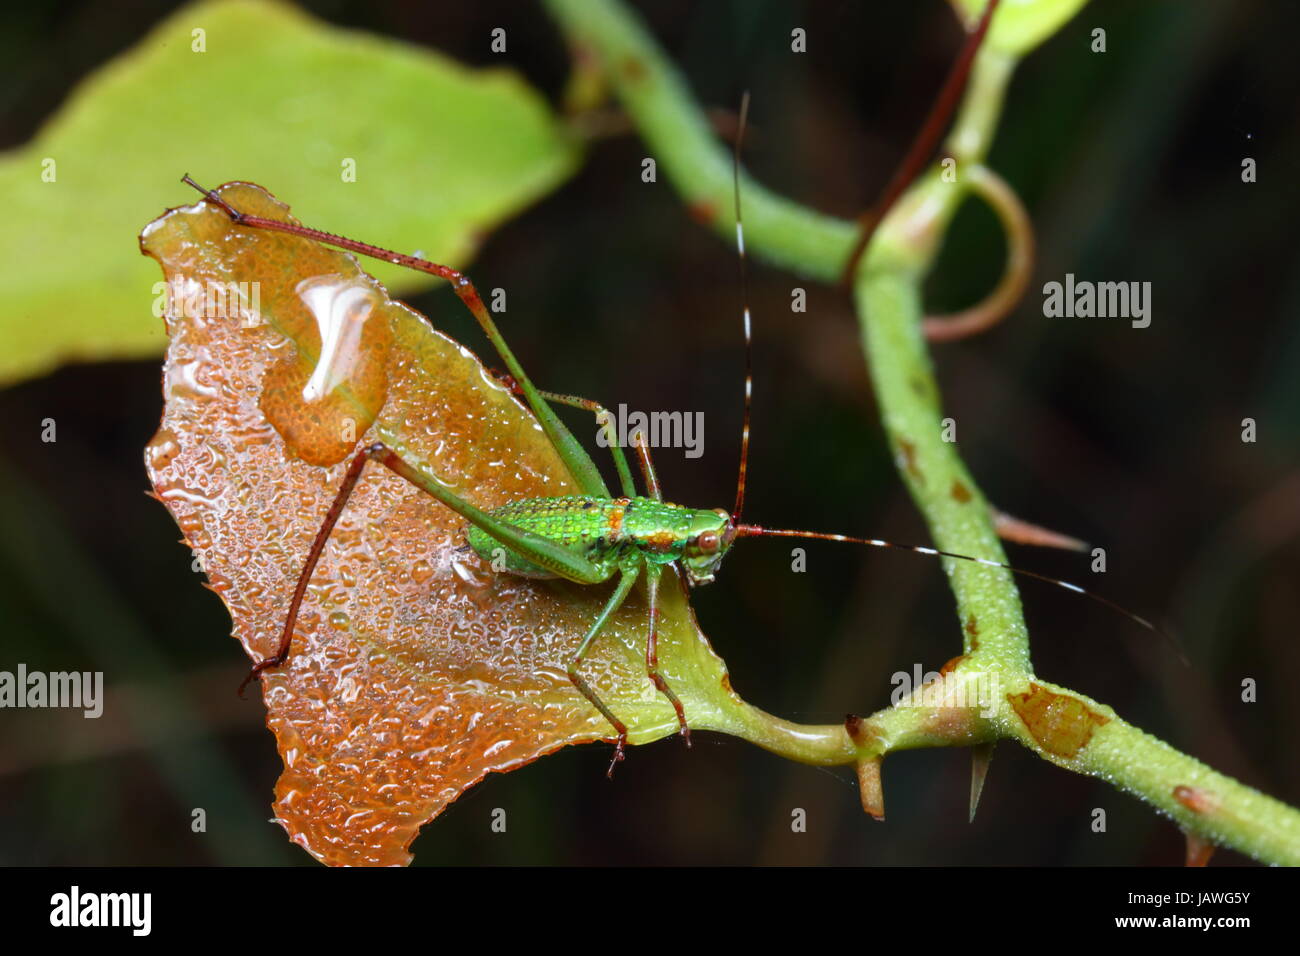 A fork-tailed katydid nymph of the genus Scudaria. Stock Photo